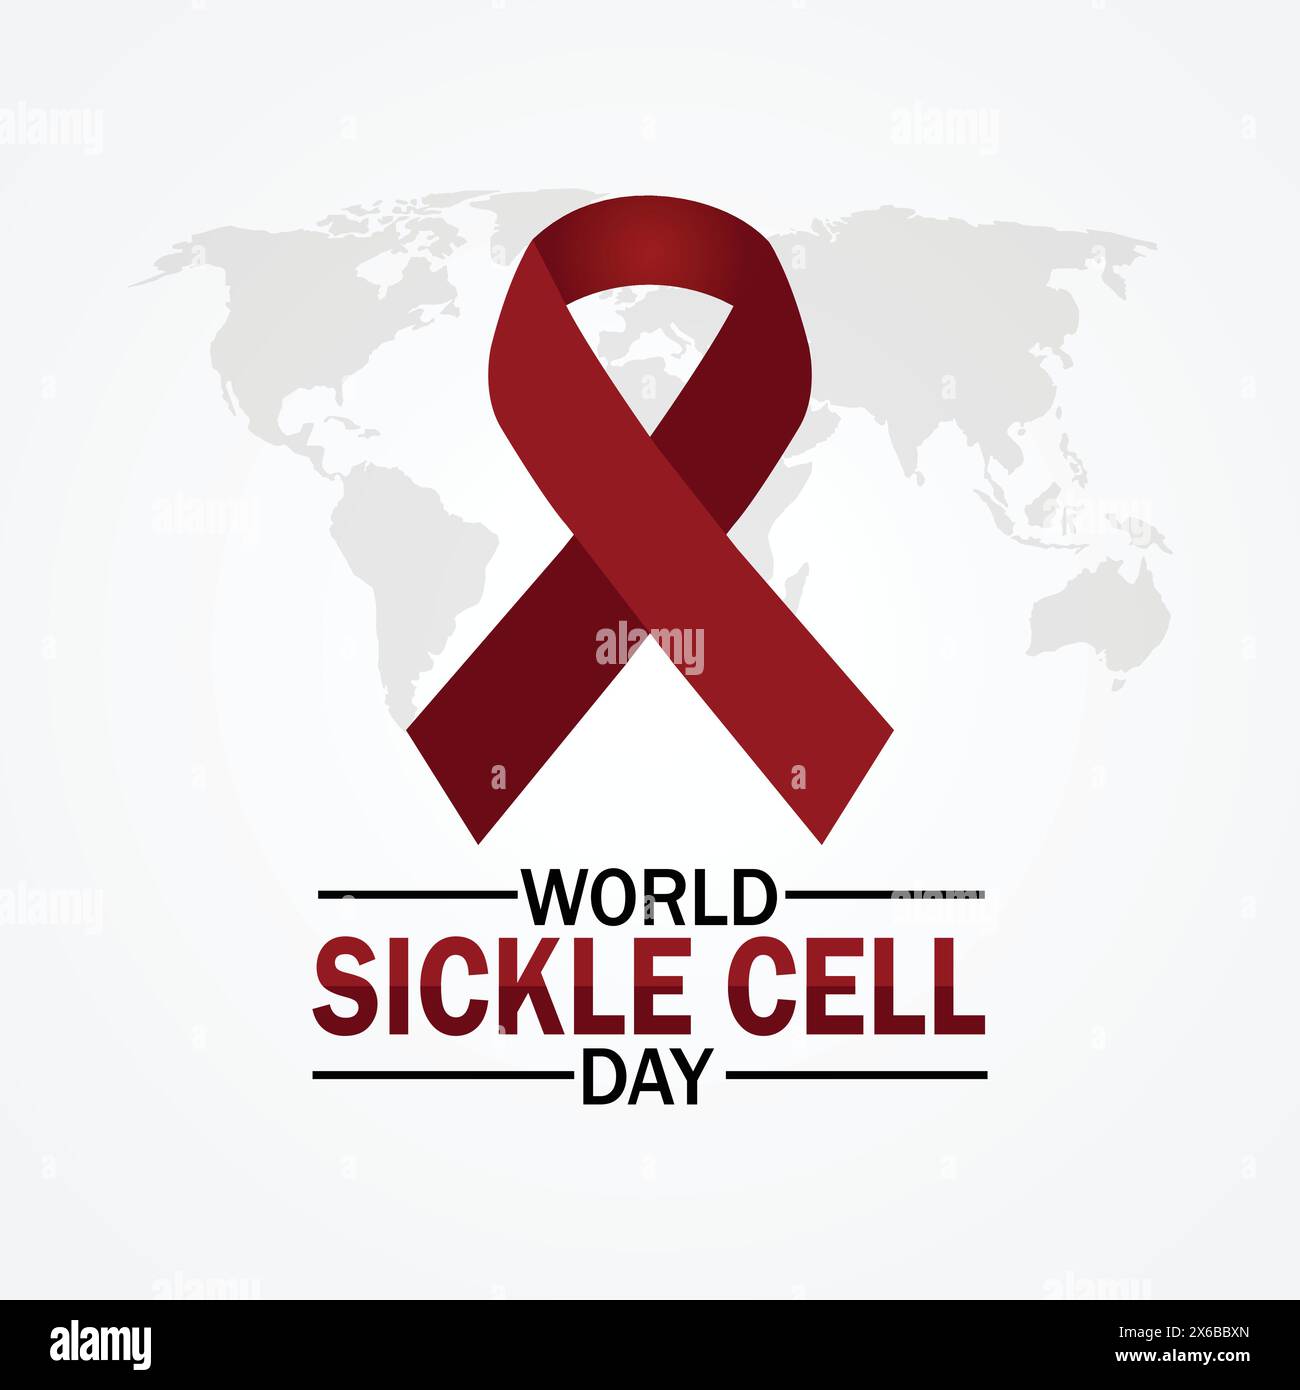 World Sickle Cell Day. Holiday concept. Template for background, banner, card, poster with text inscription. Stock Vector